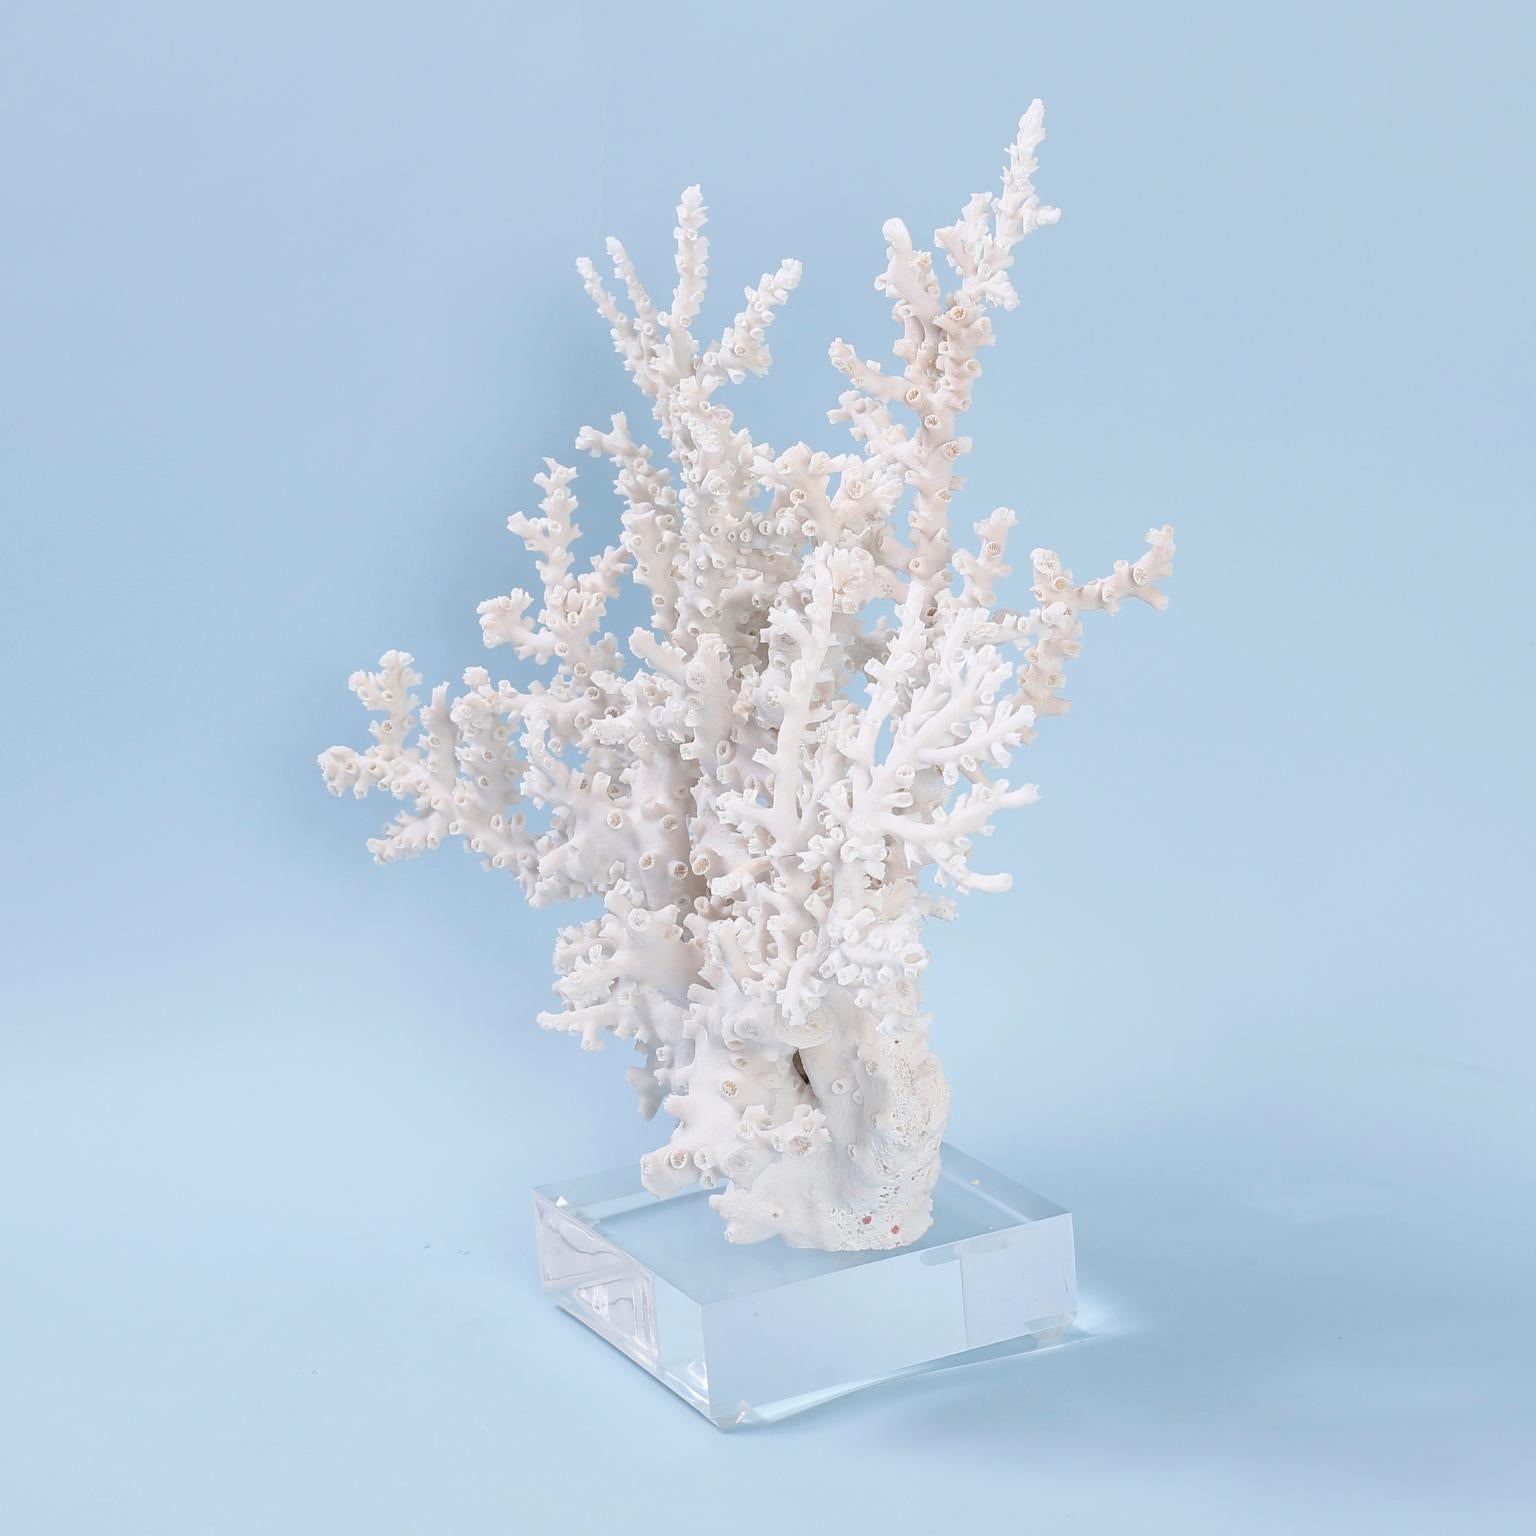 Octopus coral specimen with its distinctive tentacle like structure and sea inspired soothing palette. Presented on a Lucite base to enhance the sculptural elements.

Coral being exported outside of the USA requires special clearances and permits,